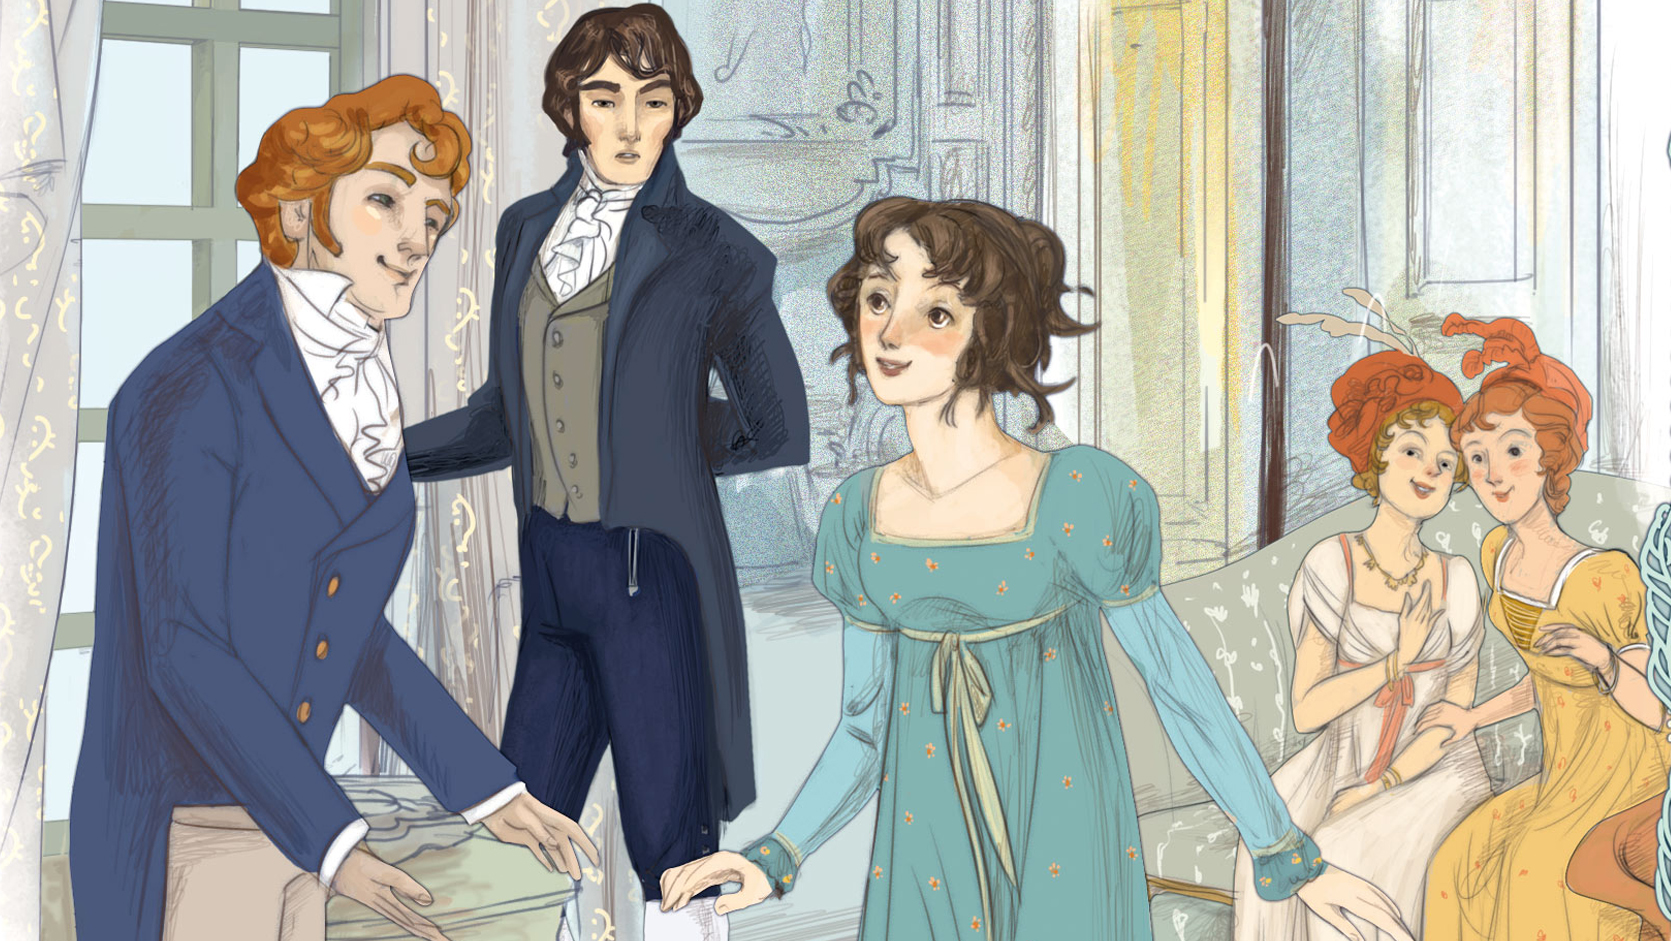 Where to Start With Jane Austen: The Ultimate Reading Guide - The Female  Scriblerian